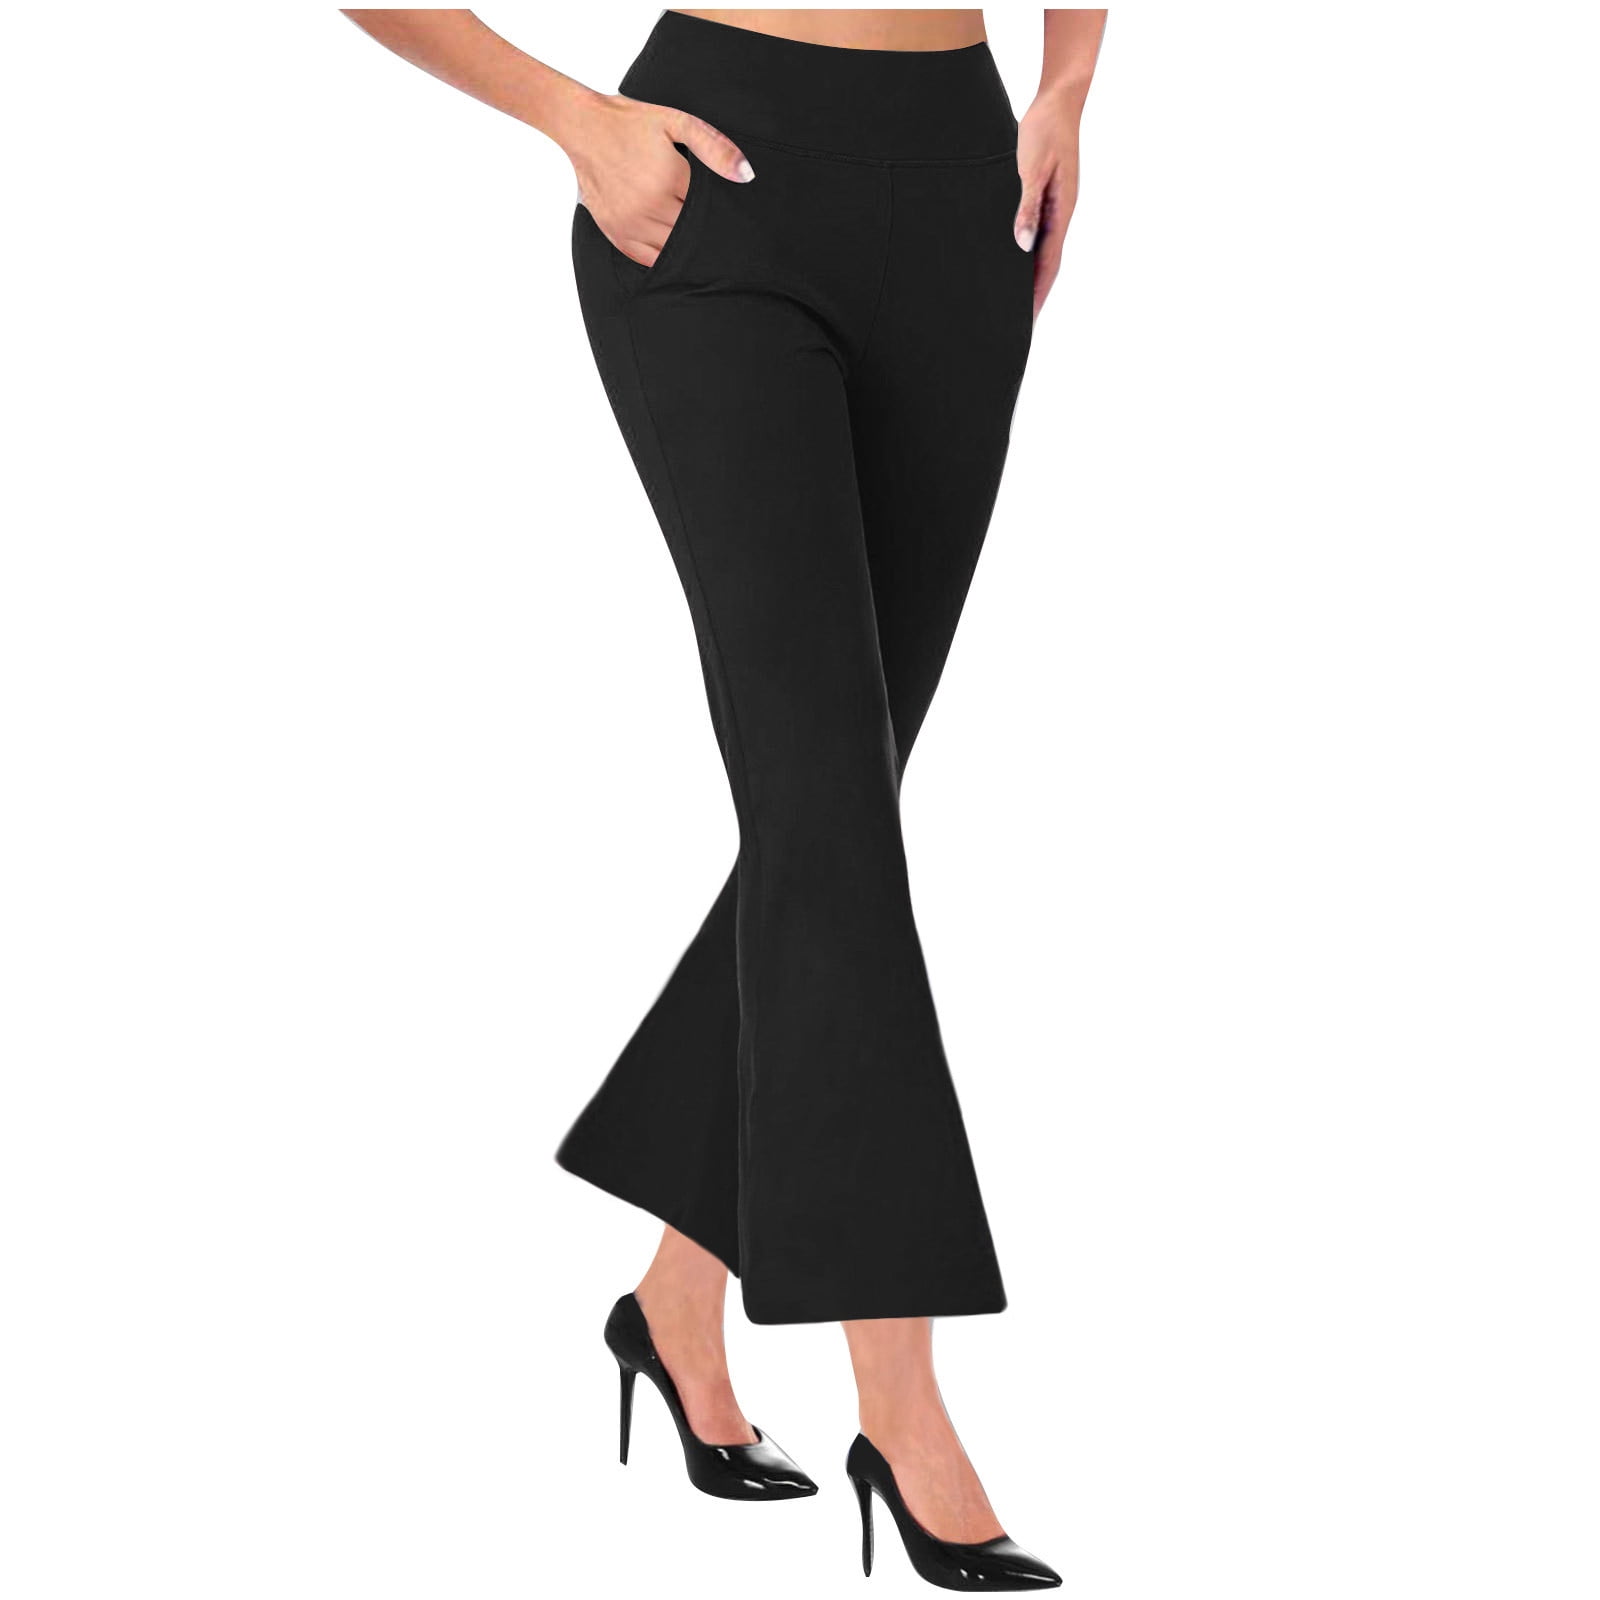 Dress Pants for Womens Stretch Dessy Yoga Trousers Business Work